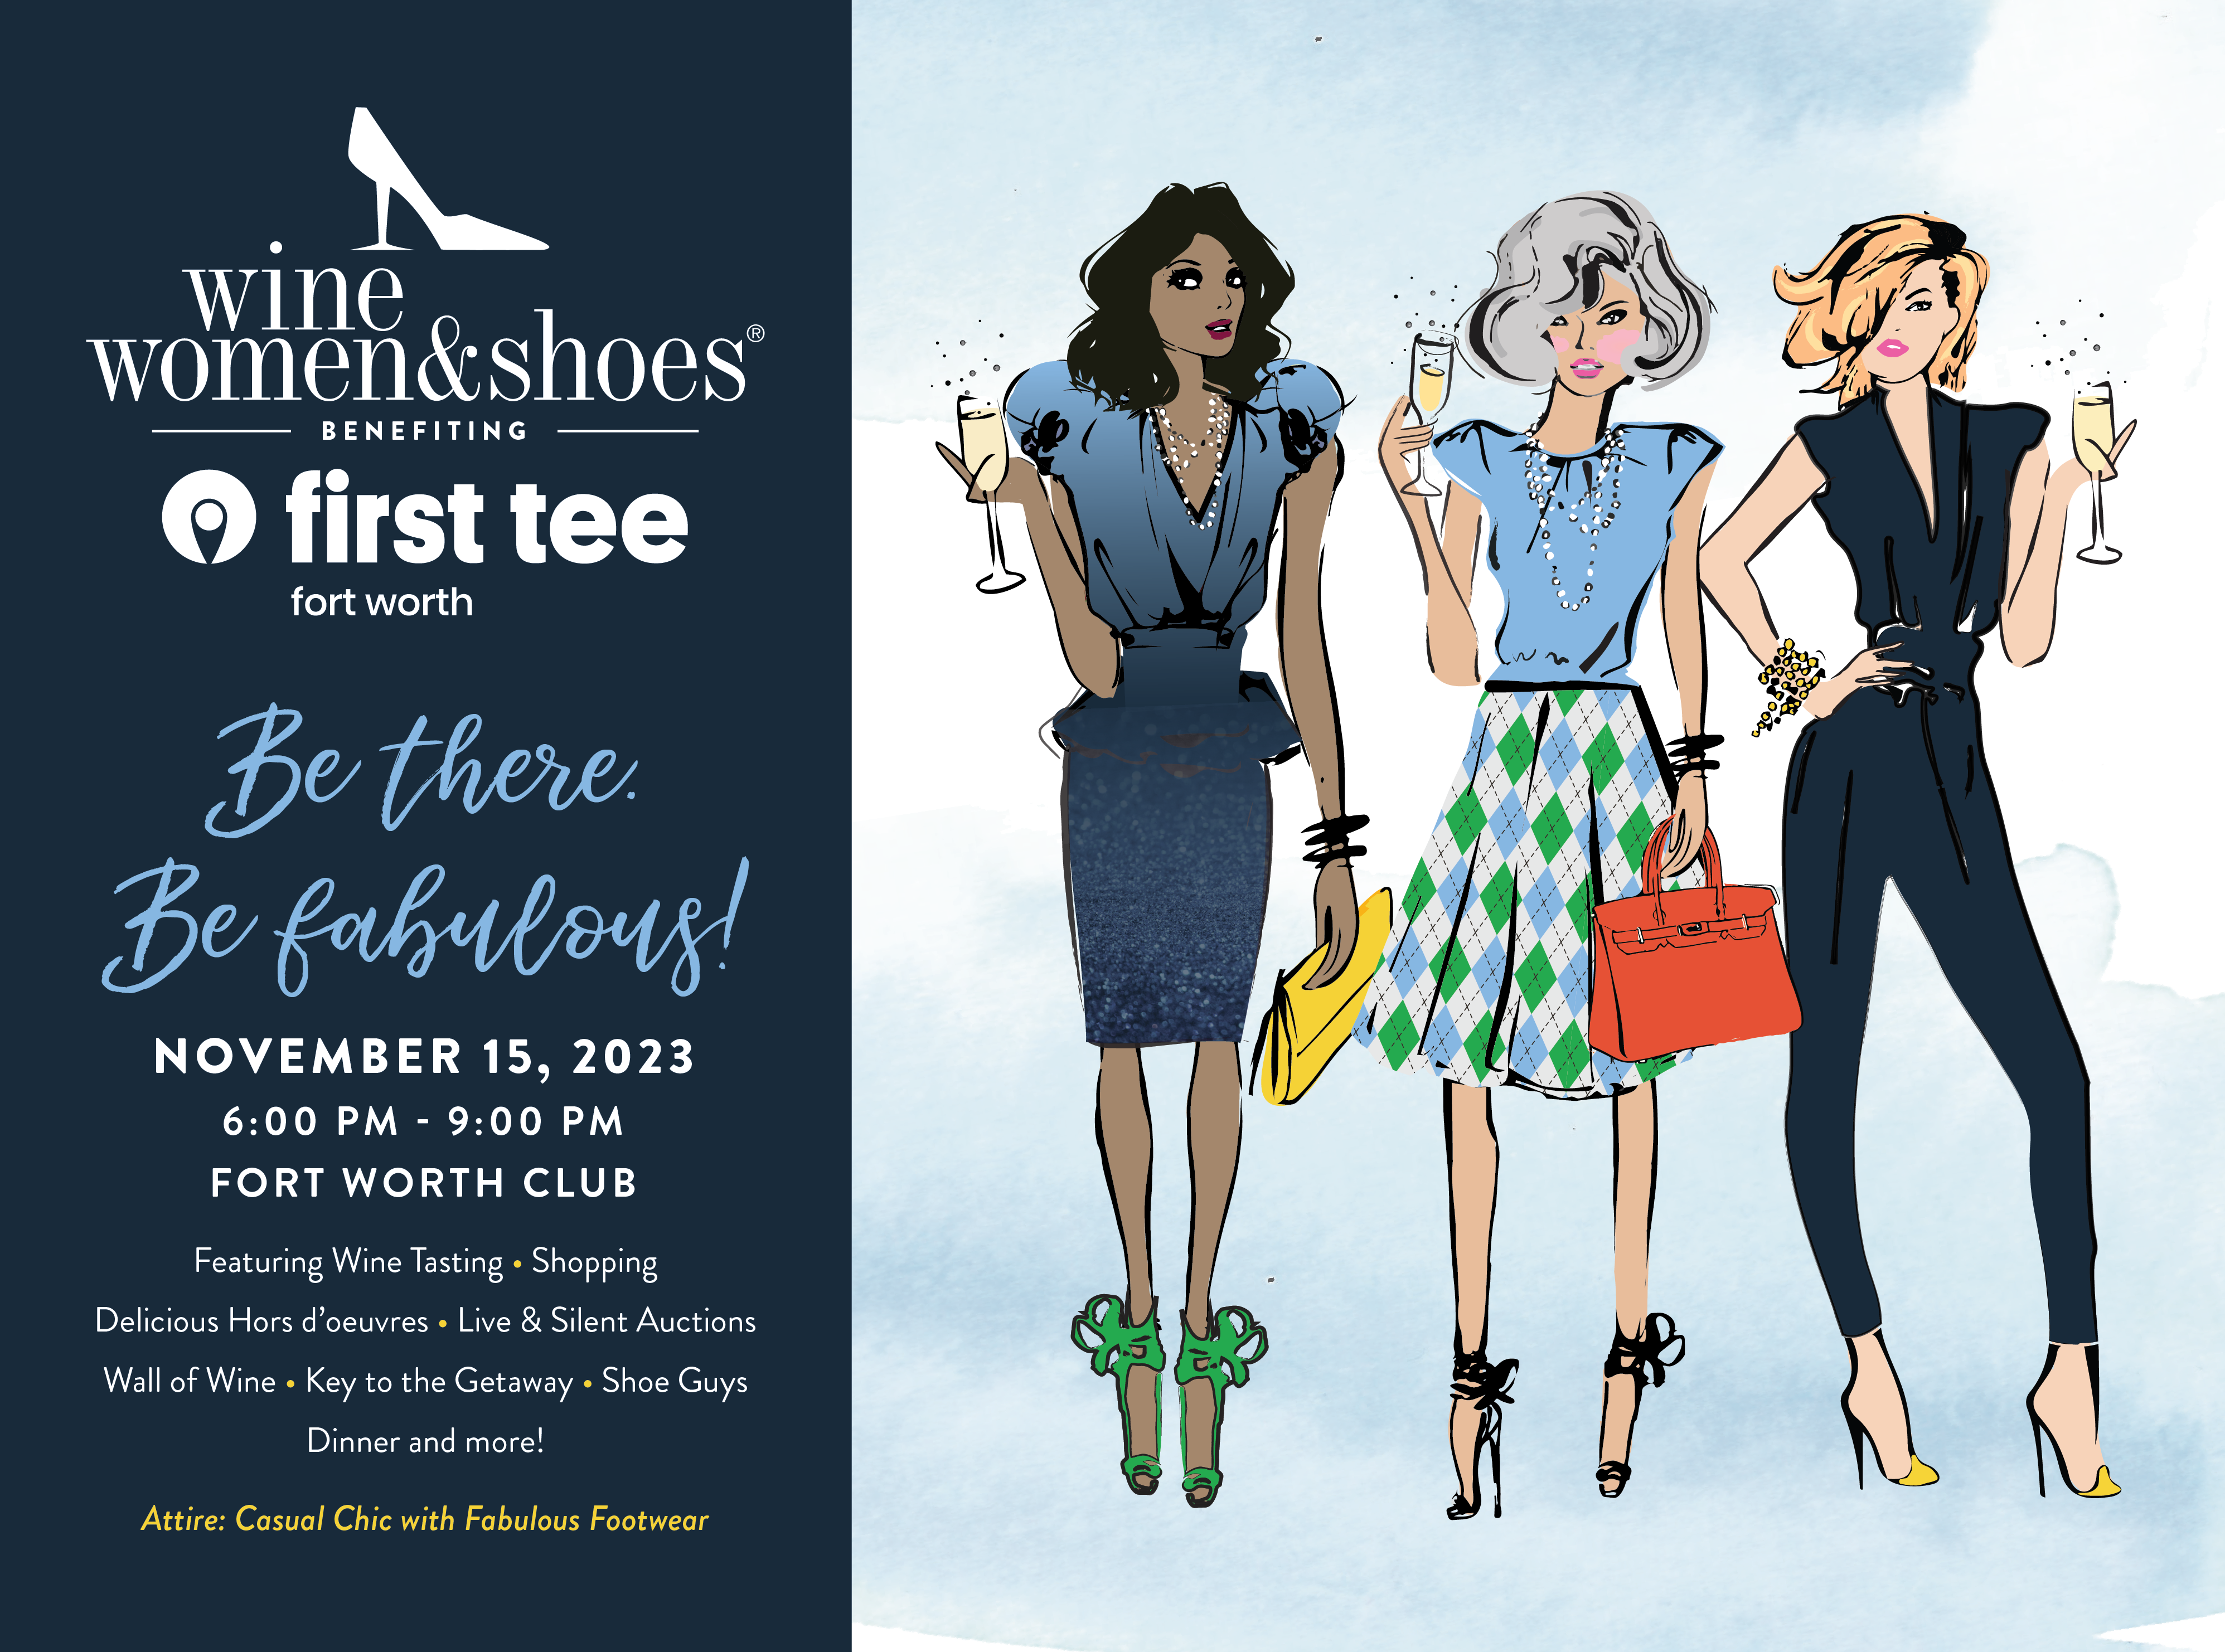 Want free tickets to attend Amarillo's 1st Wine Women & Shoes